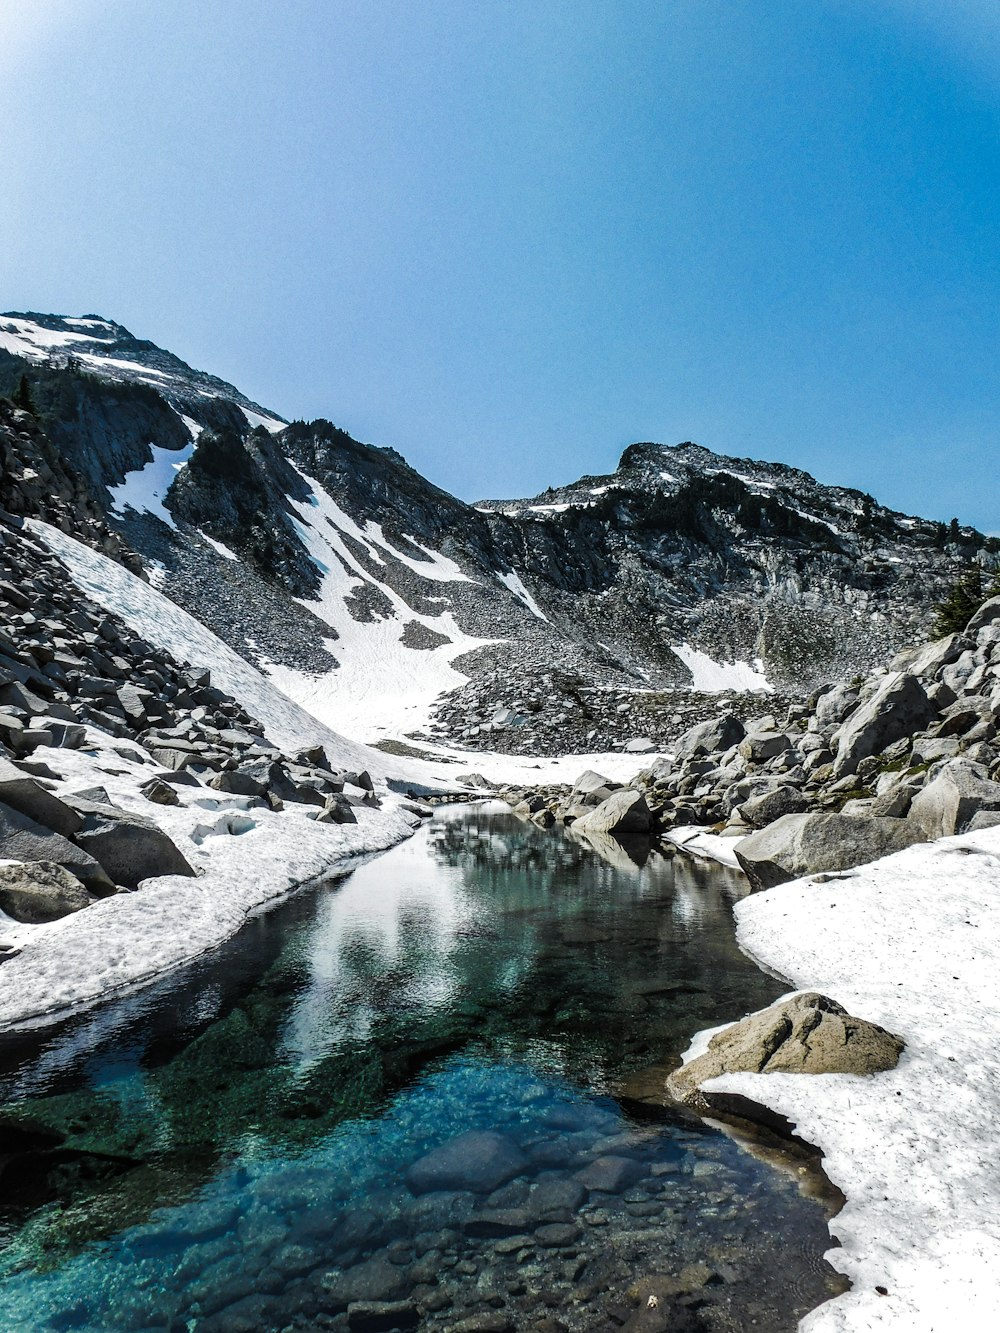 a snow covered mountain with a lake in the middle of it